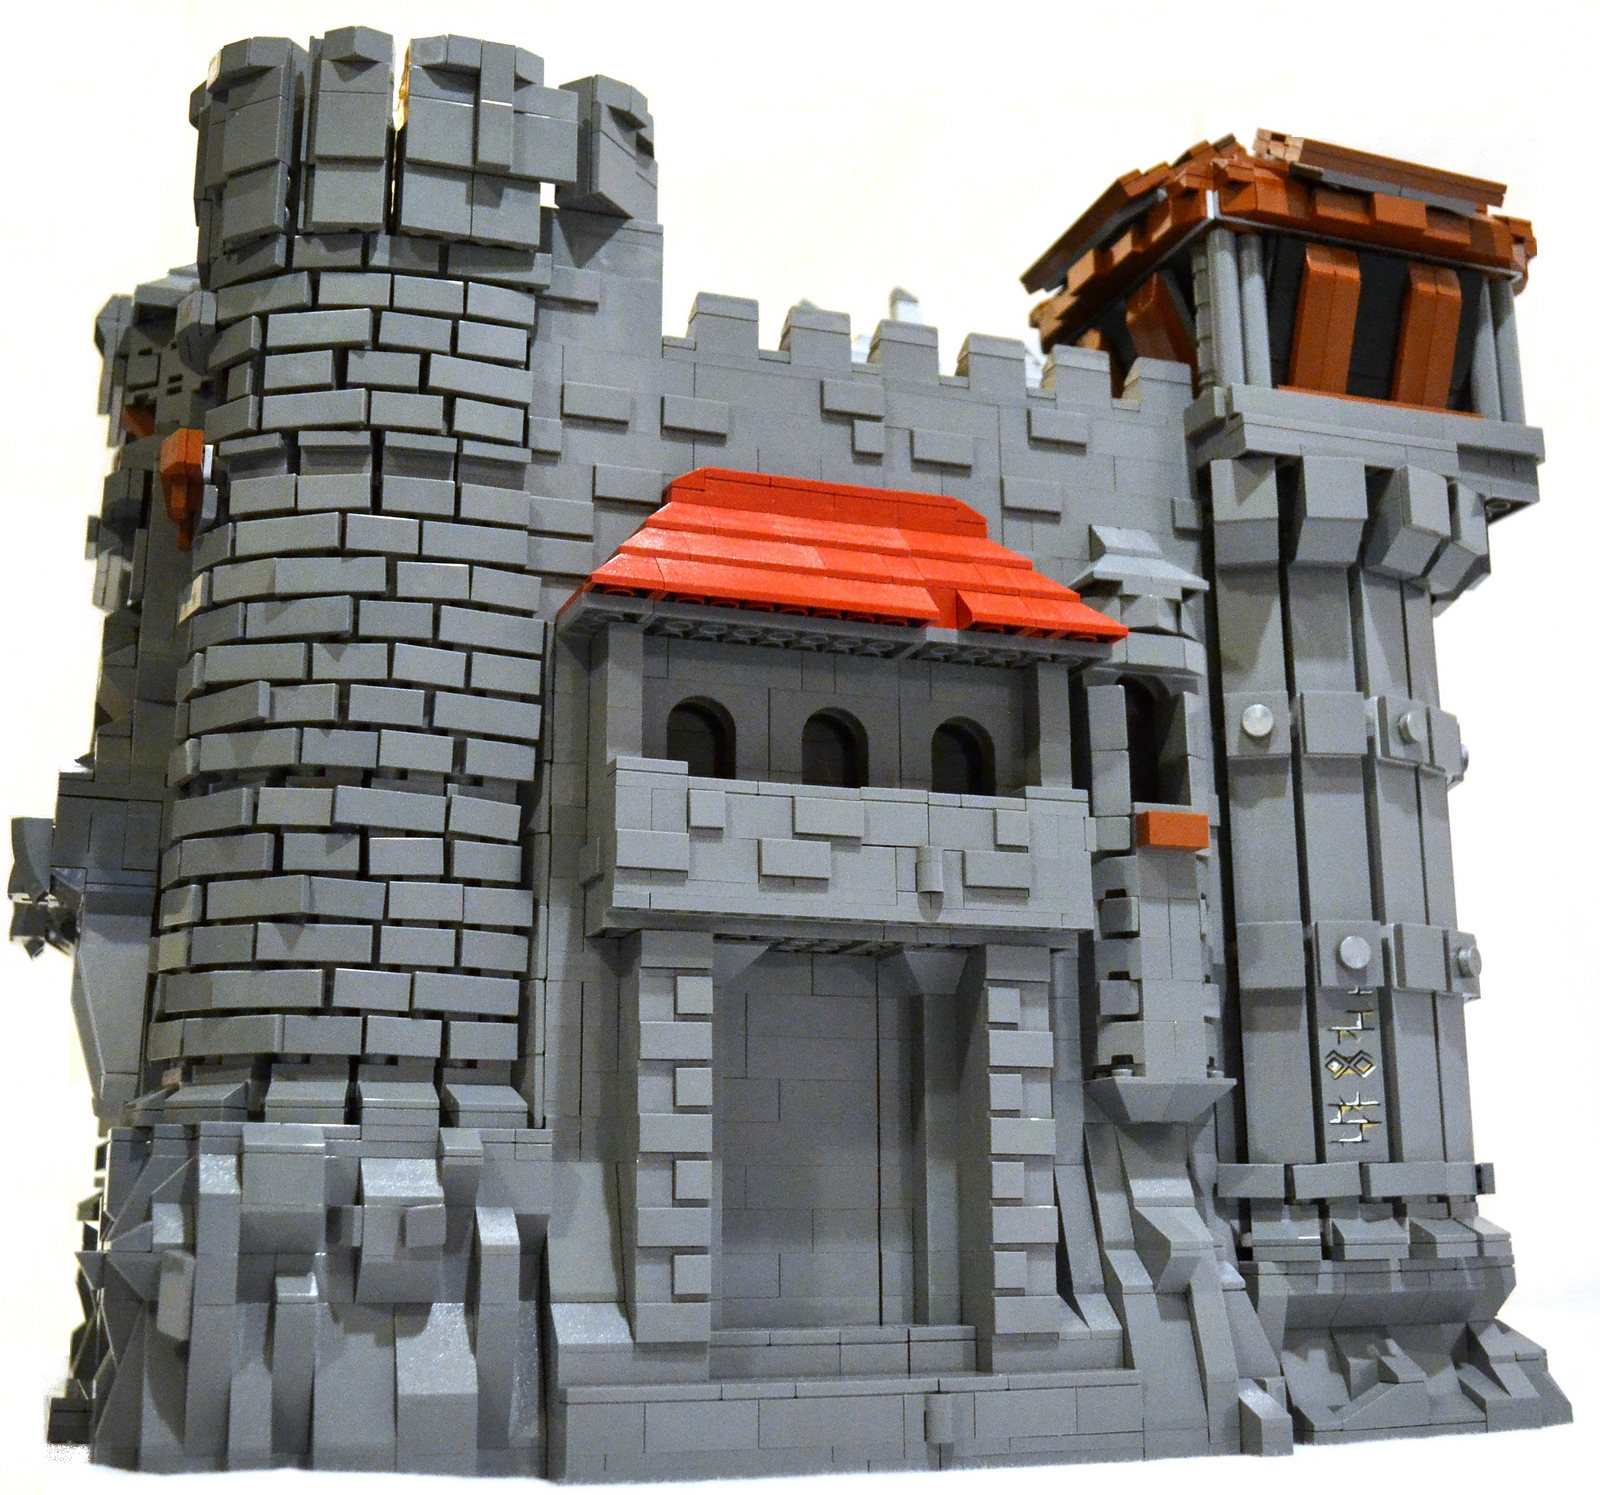 How Much Would You Pay for this LEGO Castle Grayskull Playset? 